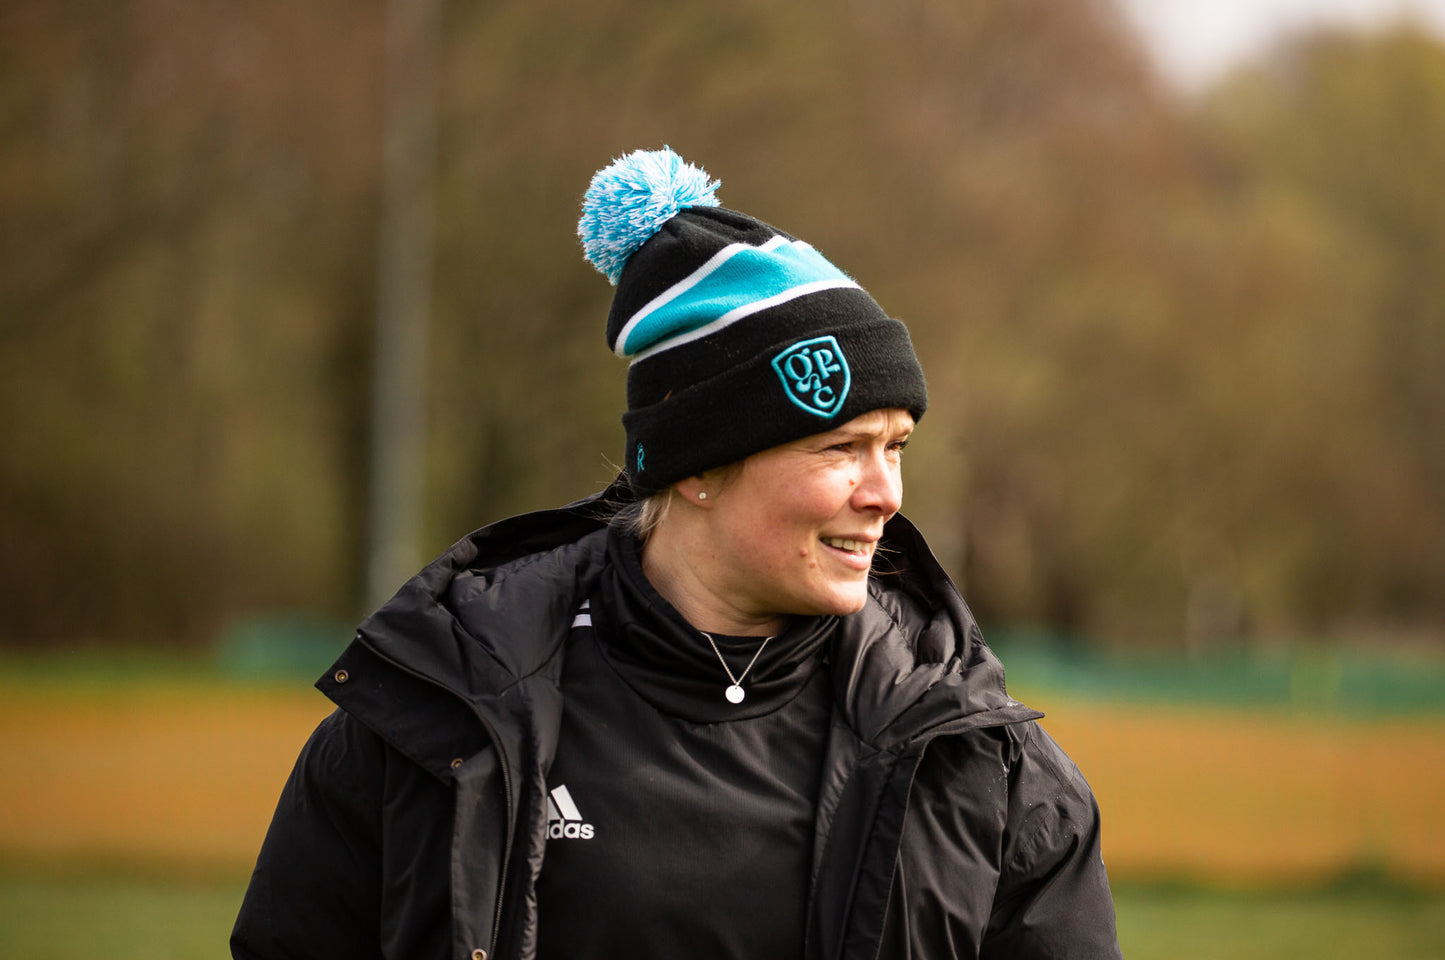 The Girls Rugby Club Bobble Hat